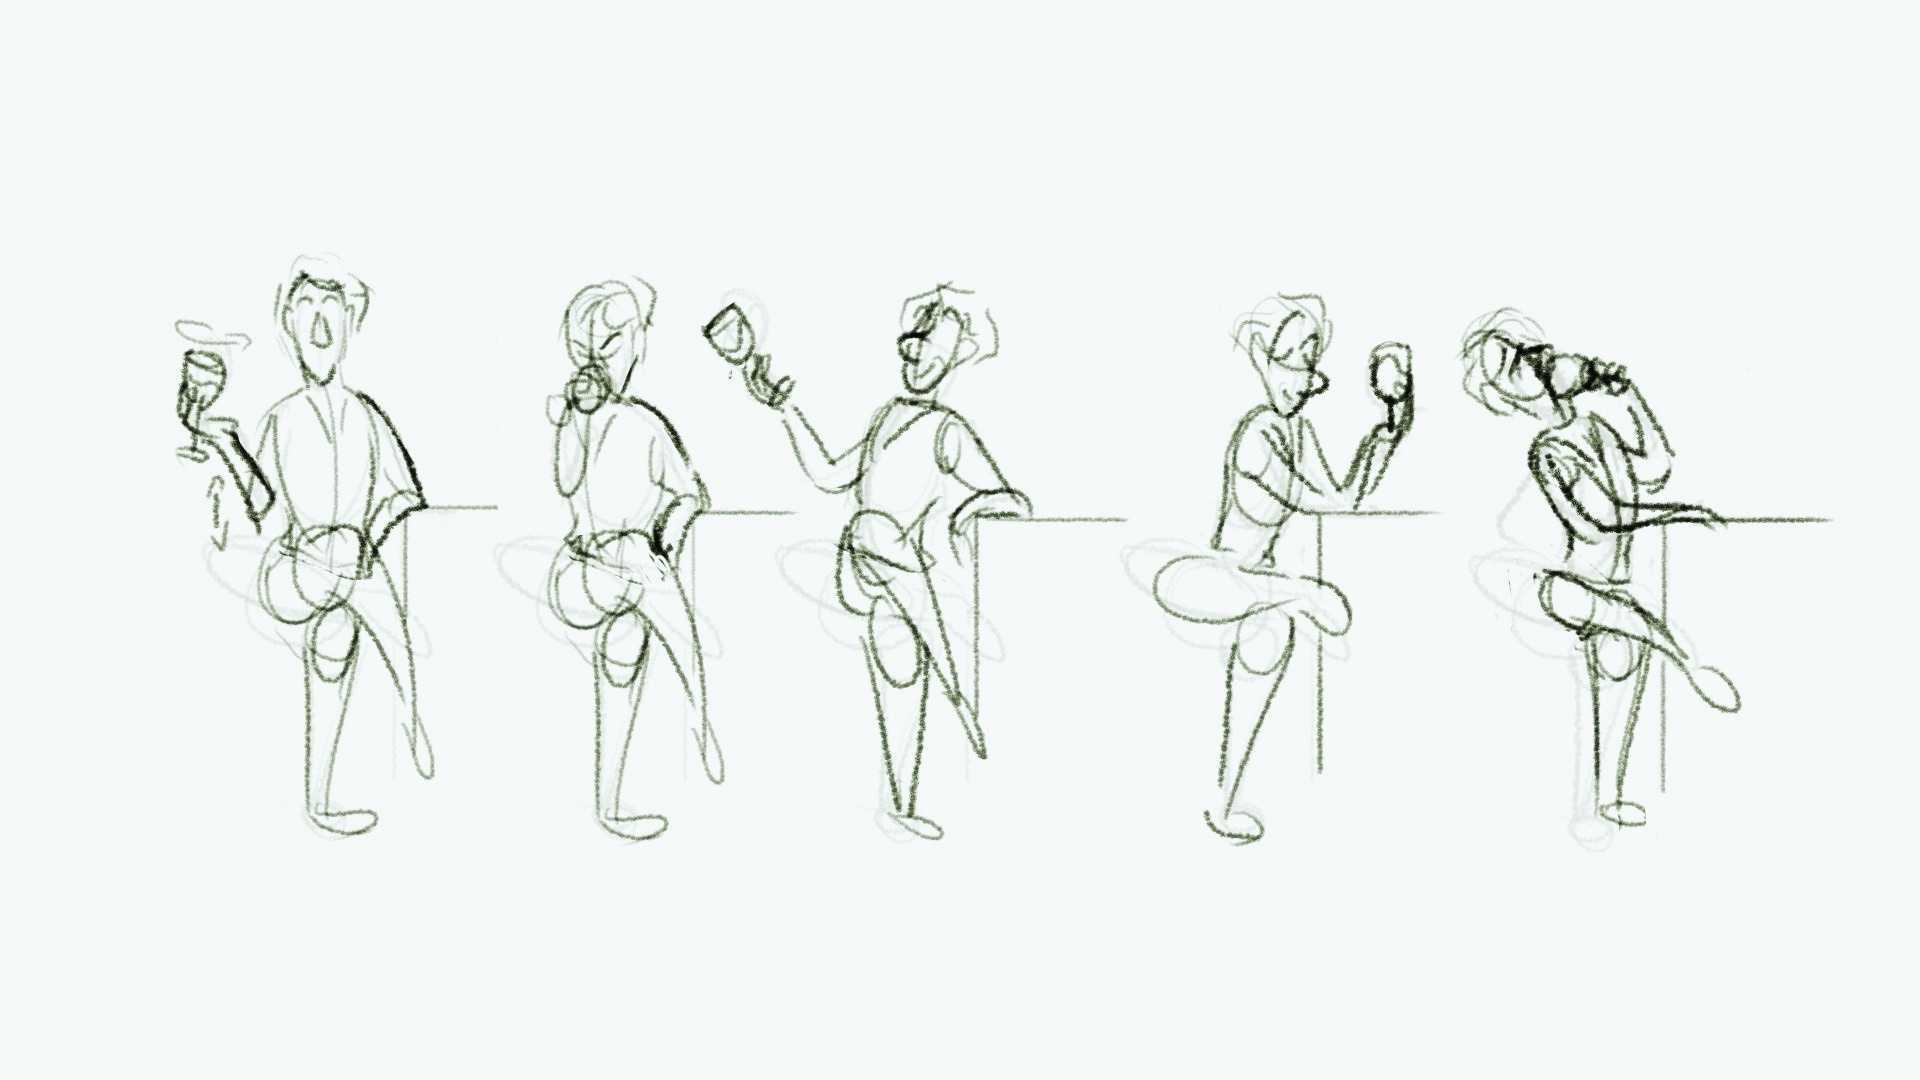 Overlapping action is one of the twelve basic principles of animation